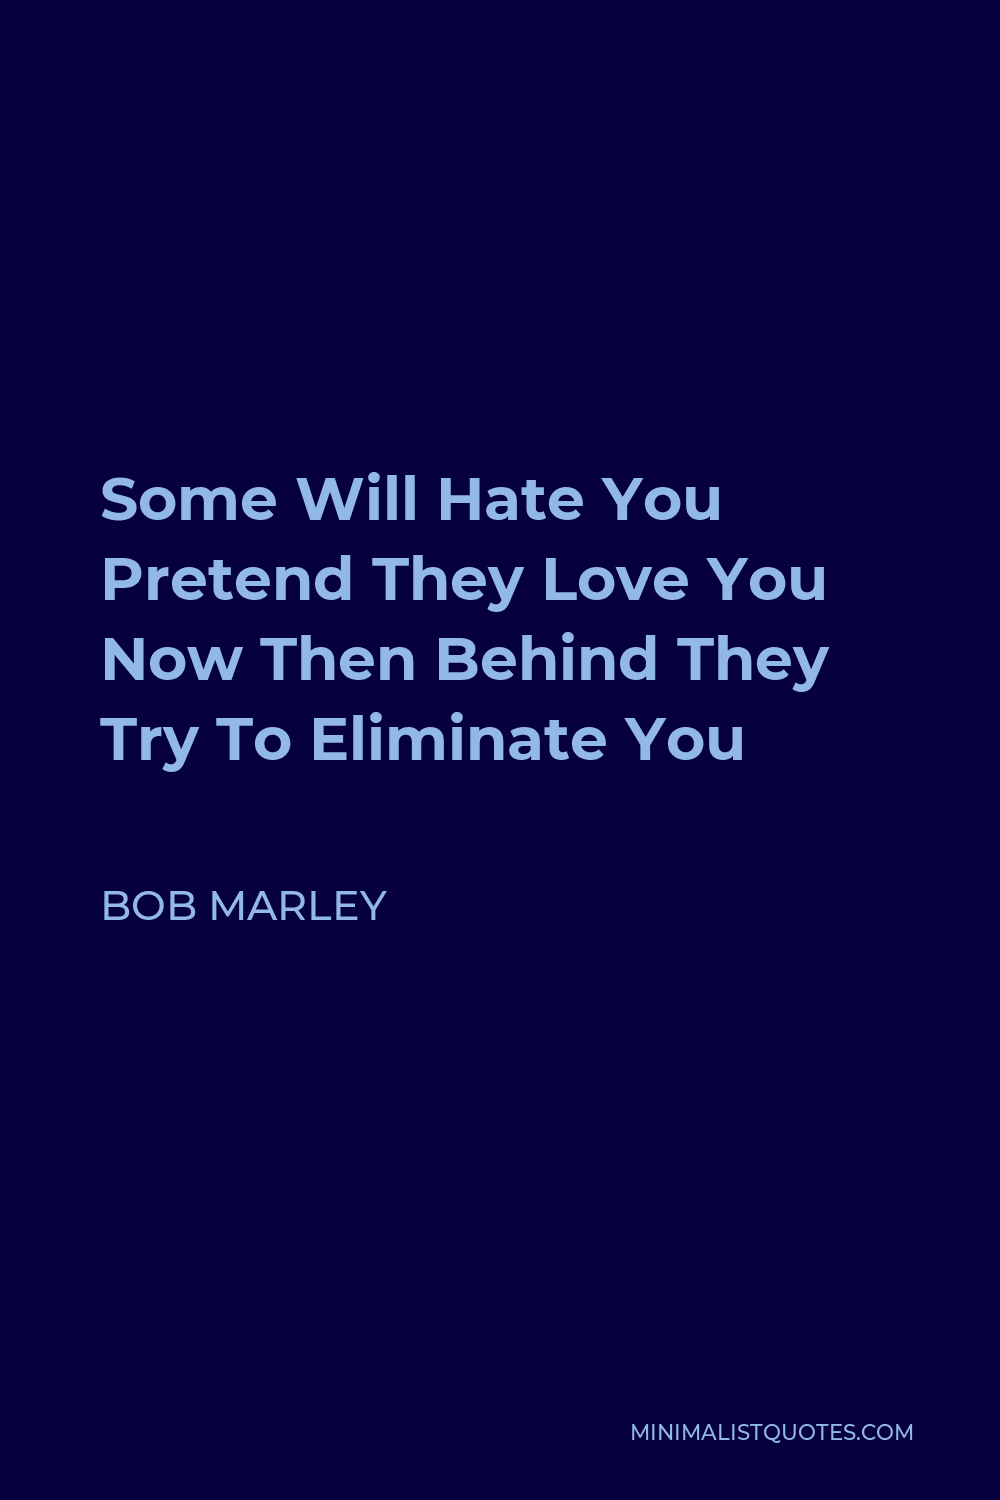 Bob Marley Quote - Some Will Hate You Pretend They Love You Now Then Behind They Try To Eliminate You